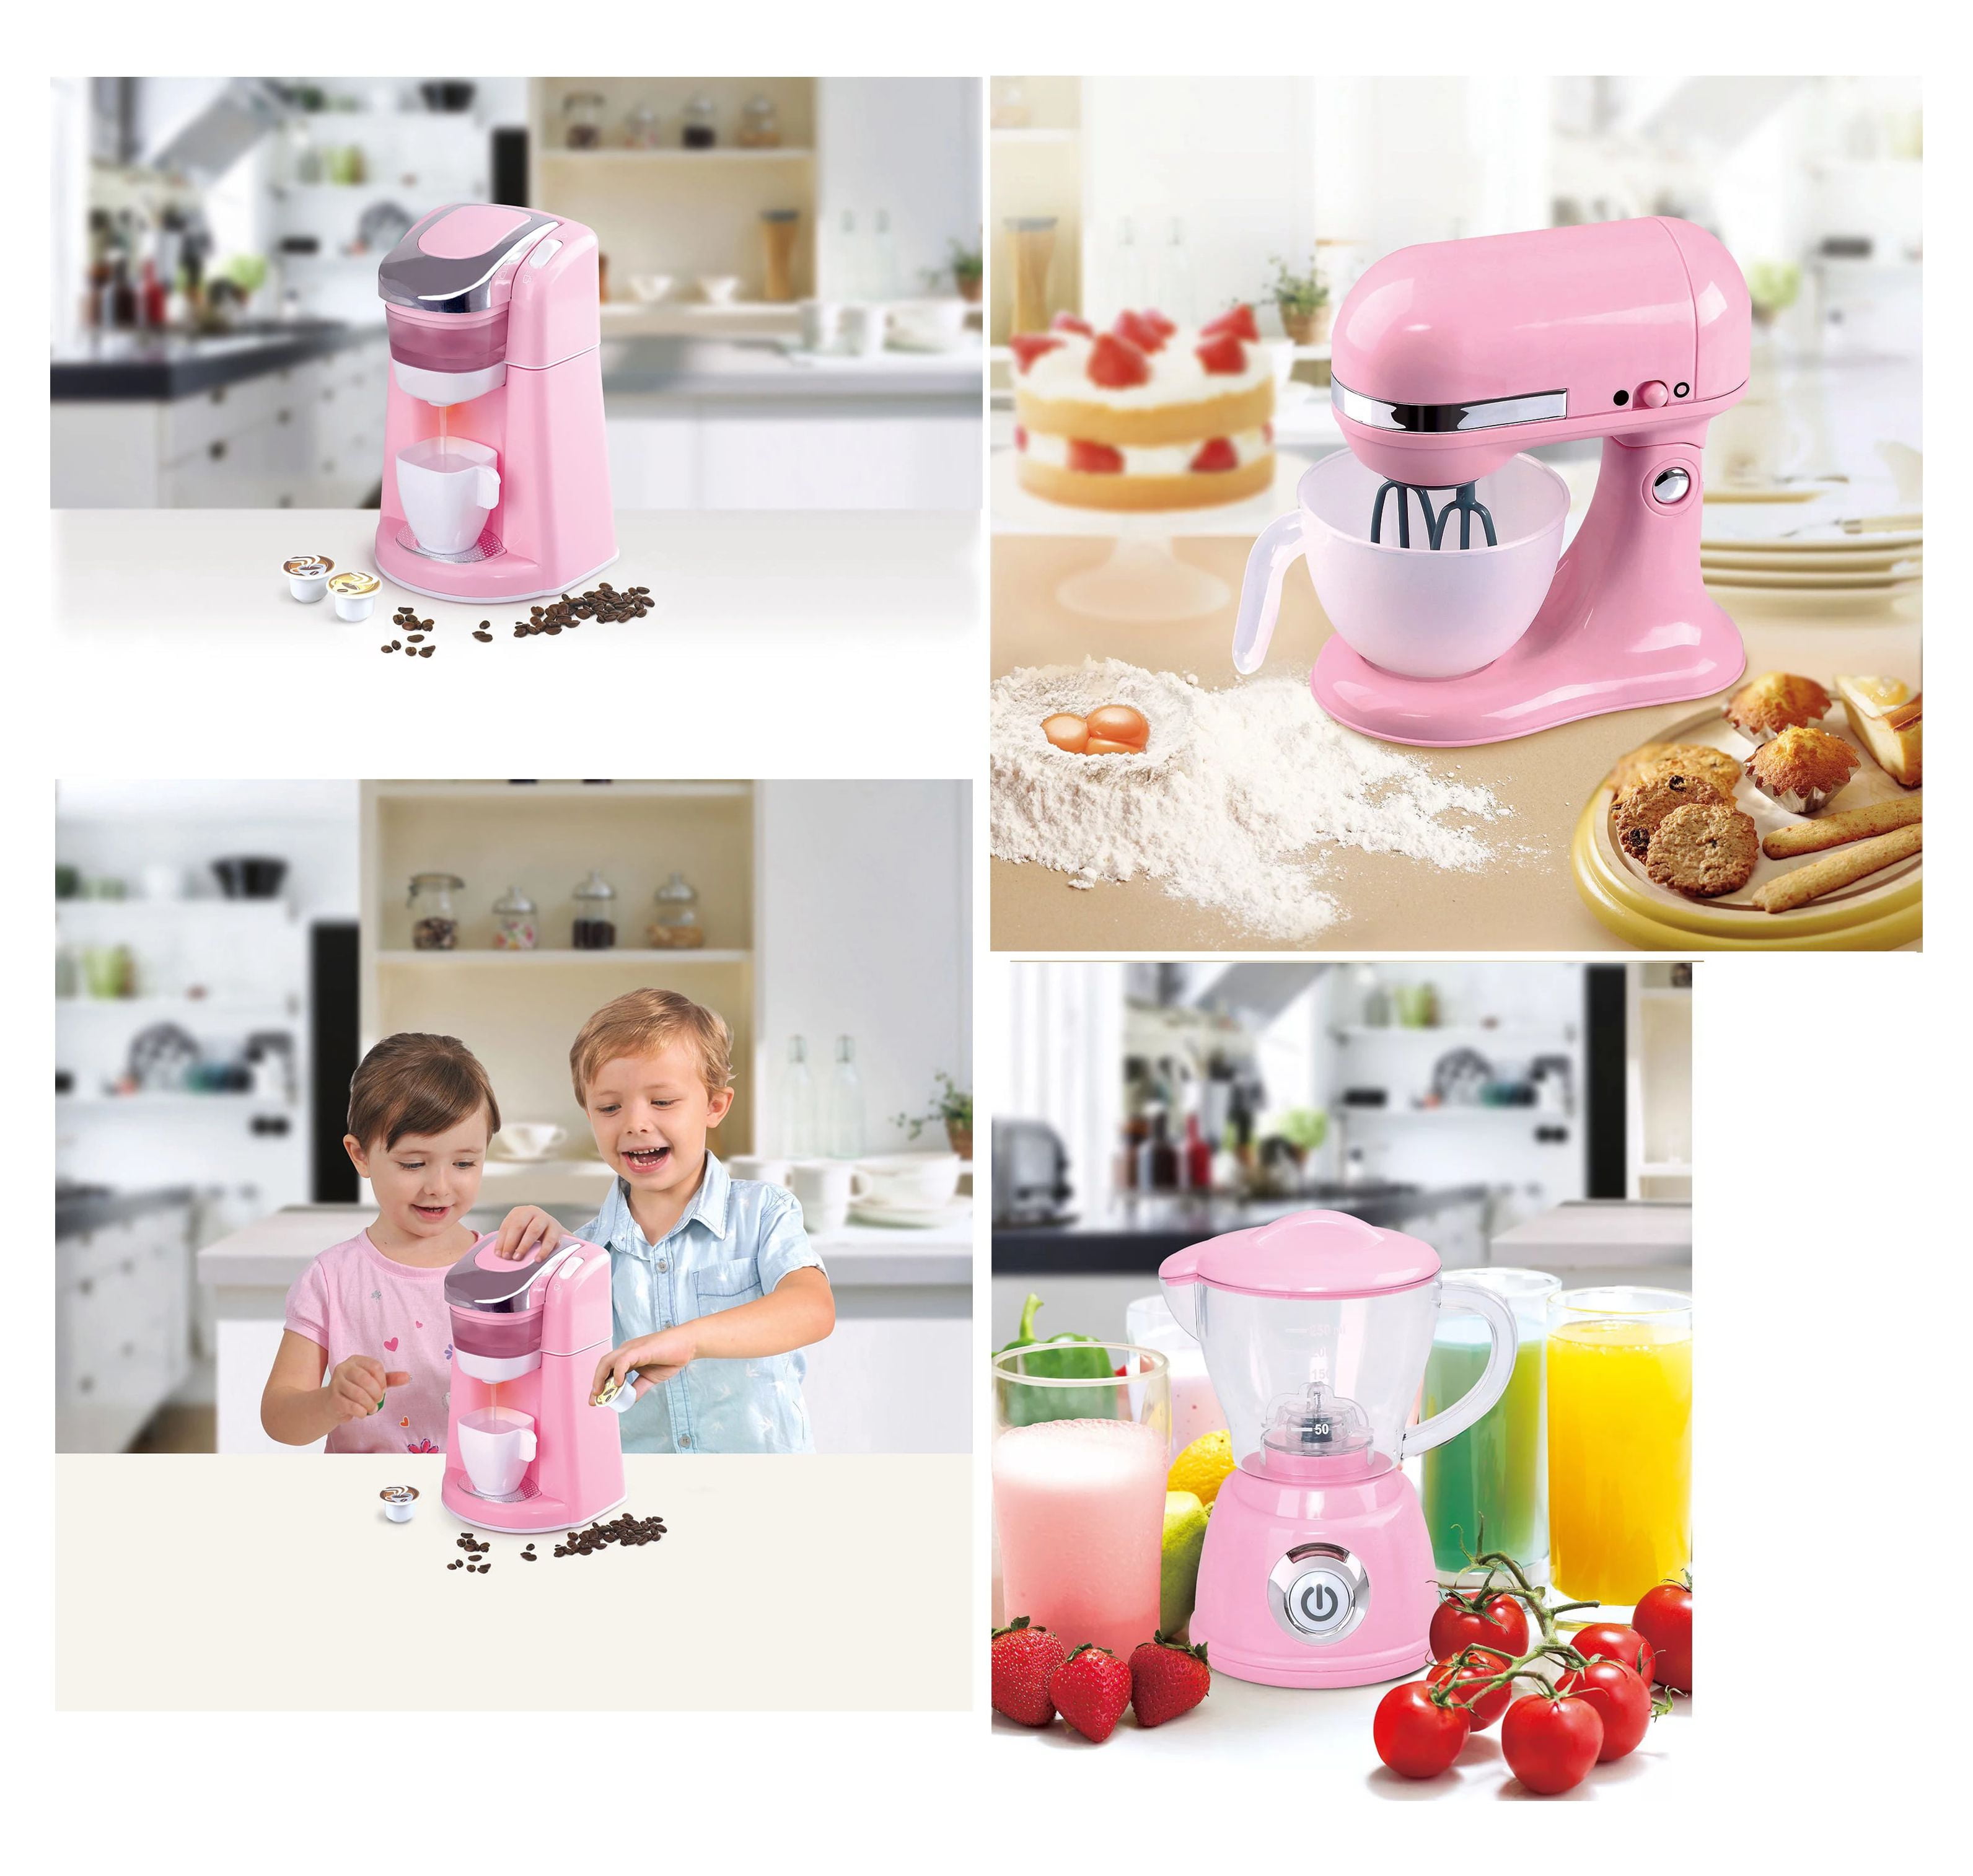 Member S Mark 3-Pc. Gourmet Kitchen Appliance Set (Pink) Realistic